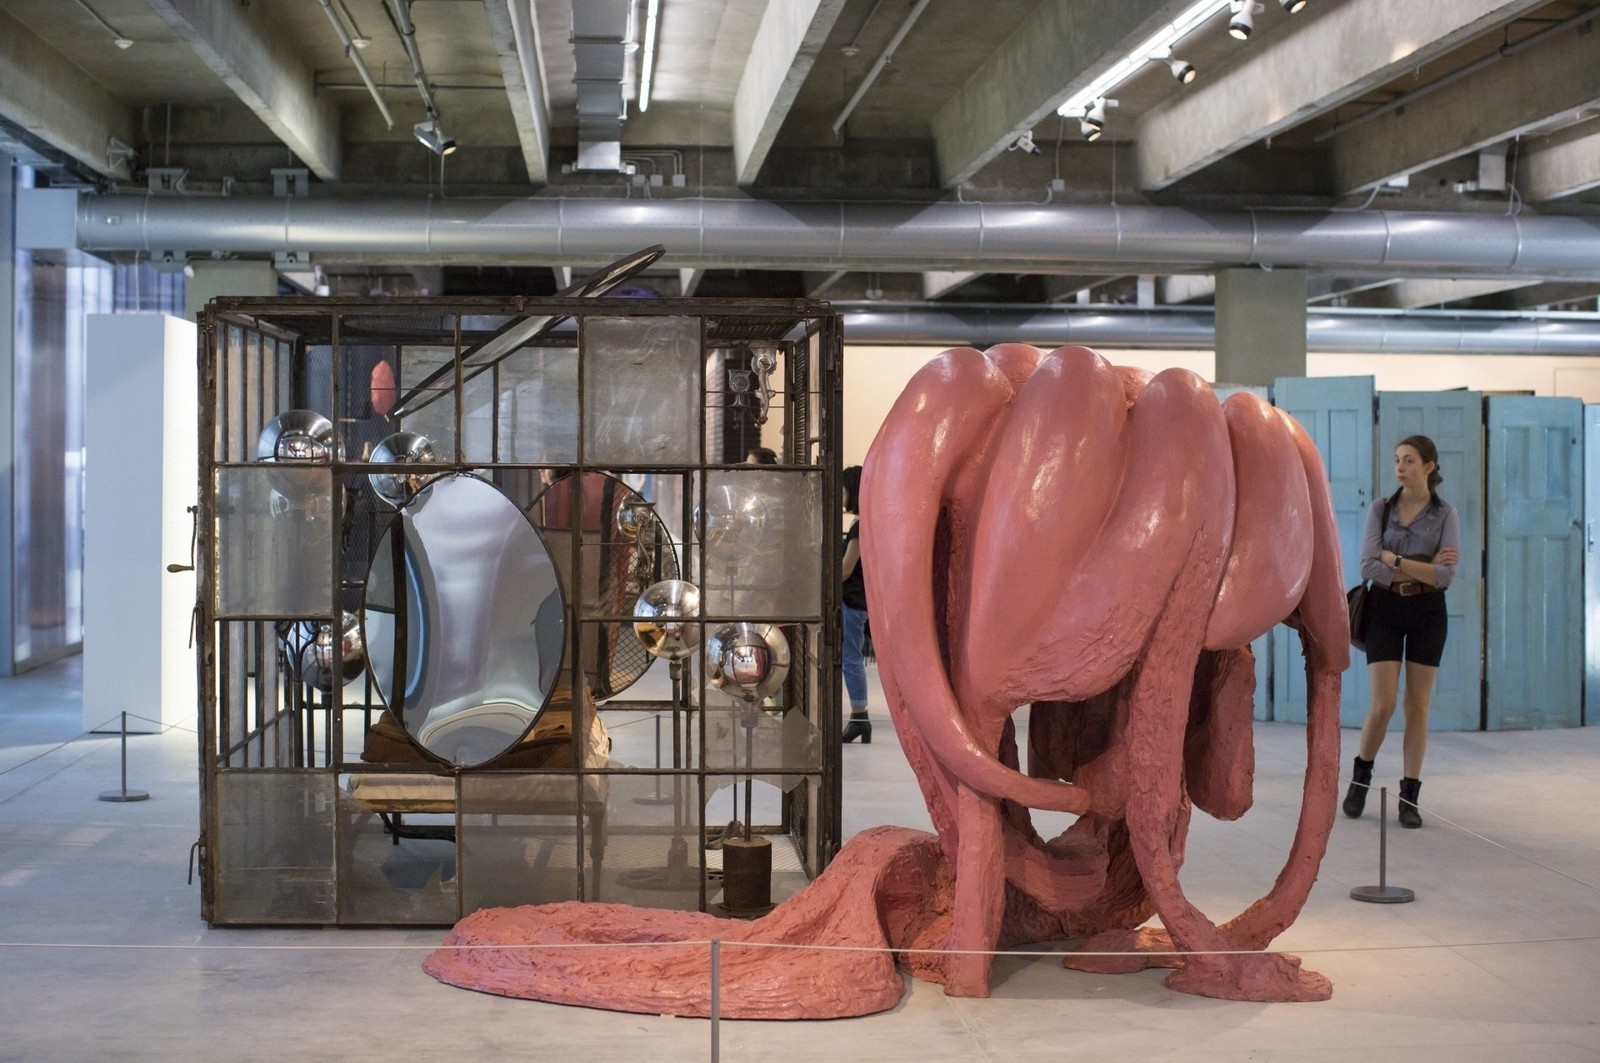 Louise Bourgeois. In and Out, 1995. Metal, glass, plaster, fabric and plastic. Cell: 205.7 x 210.8 x 210.8 cm. Plastic: 195 x 170 x 290 cm. Collection The Easton Foundation. Photo: Maximilian Geuter, &copy; The Easton Foundation / RAO, Moscow